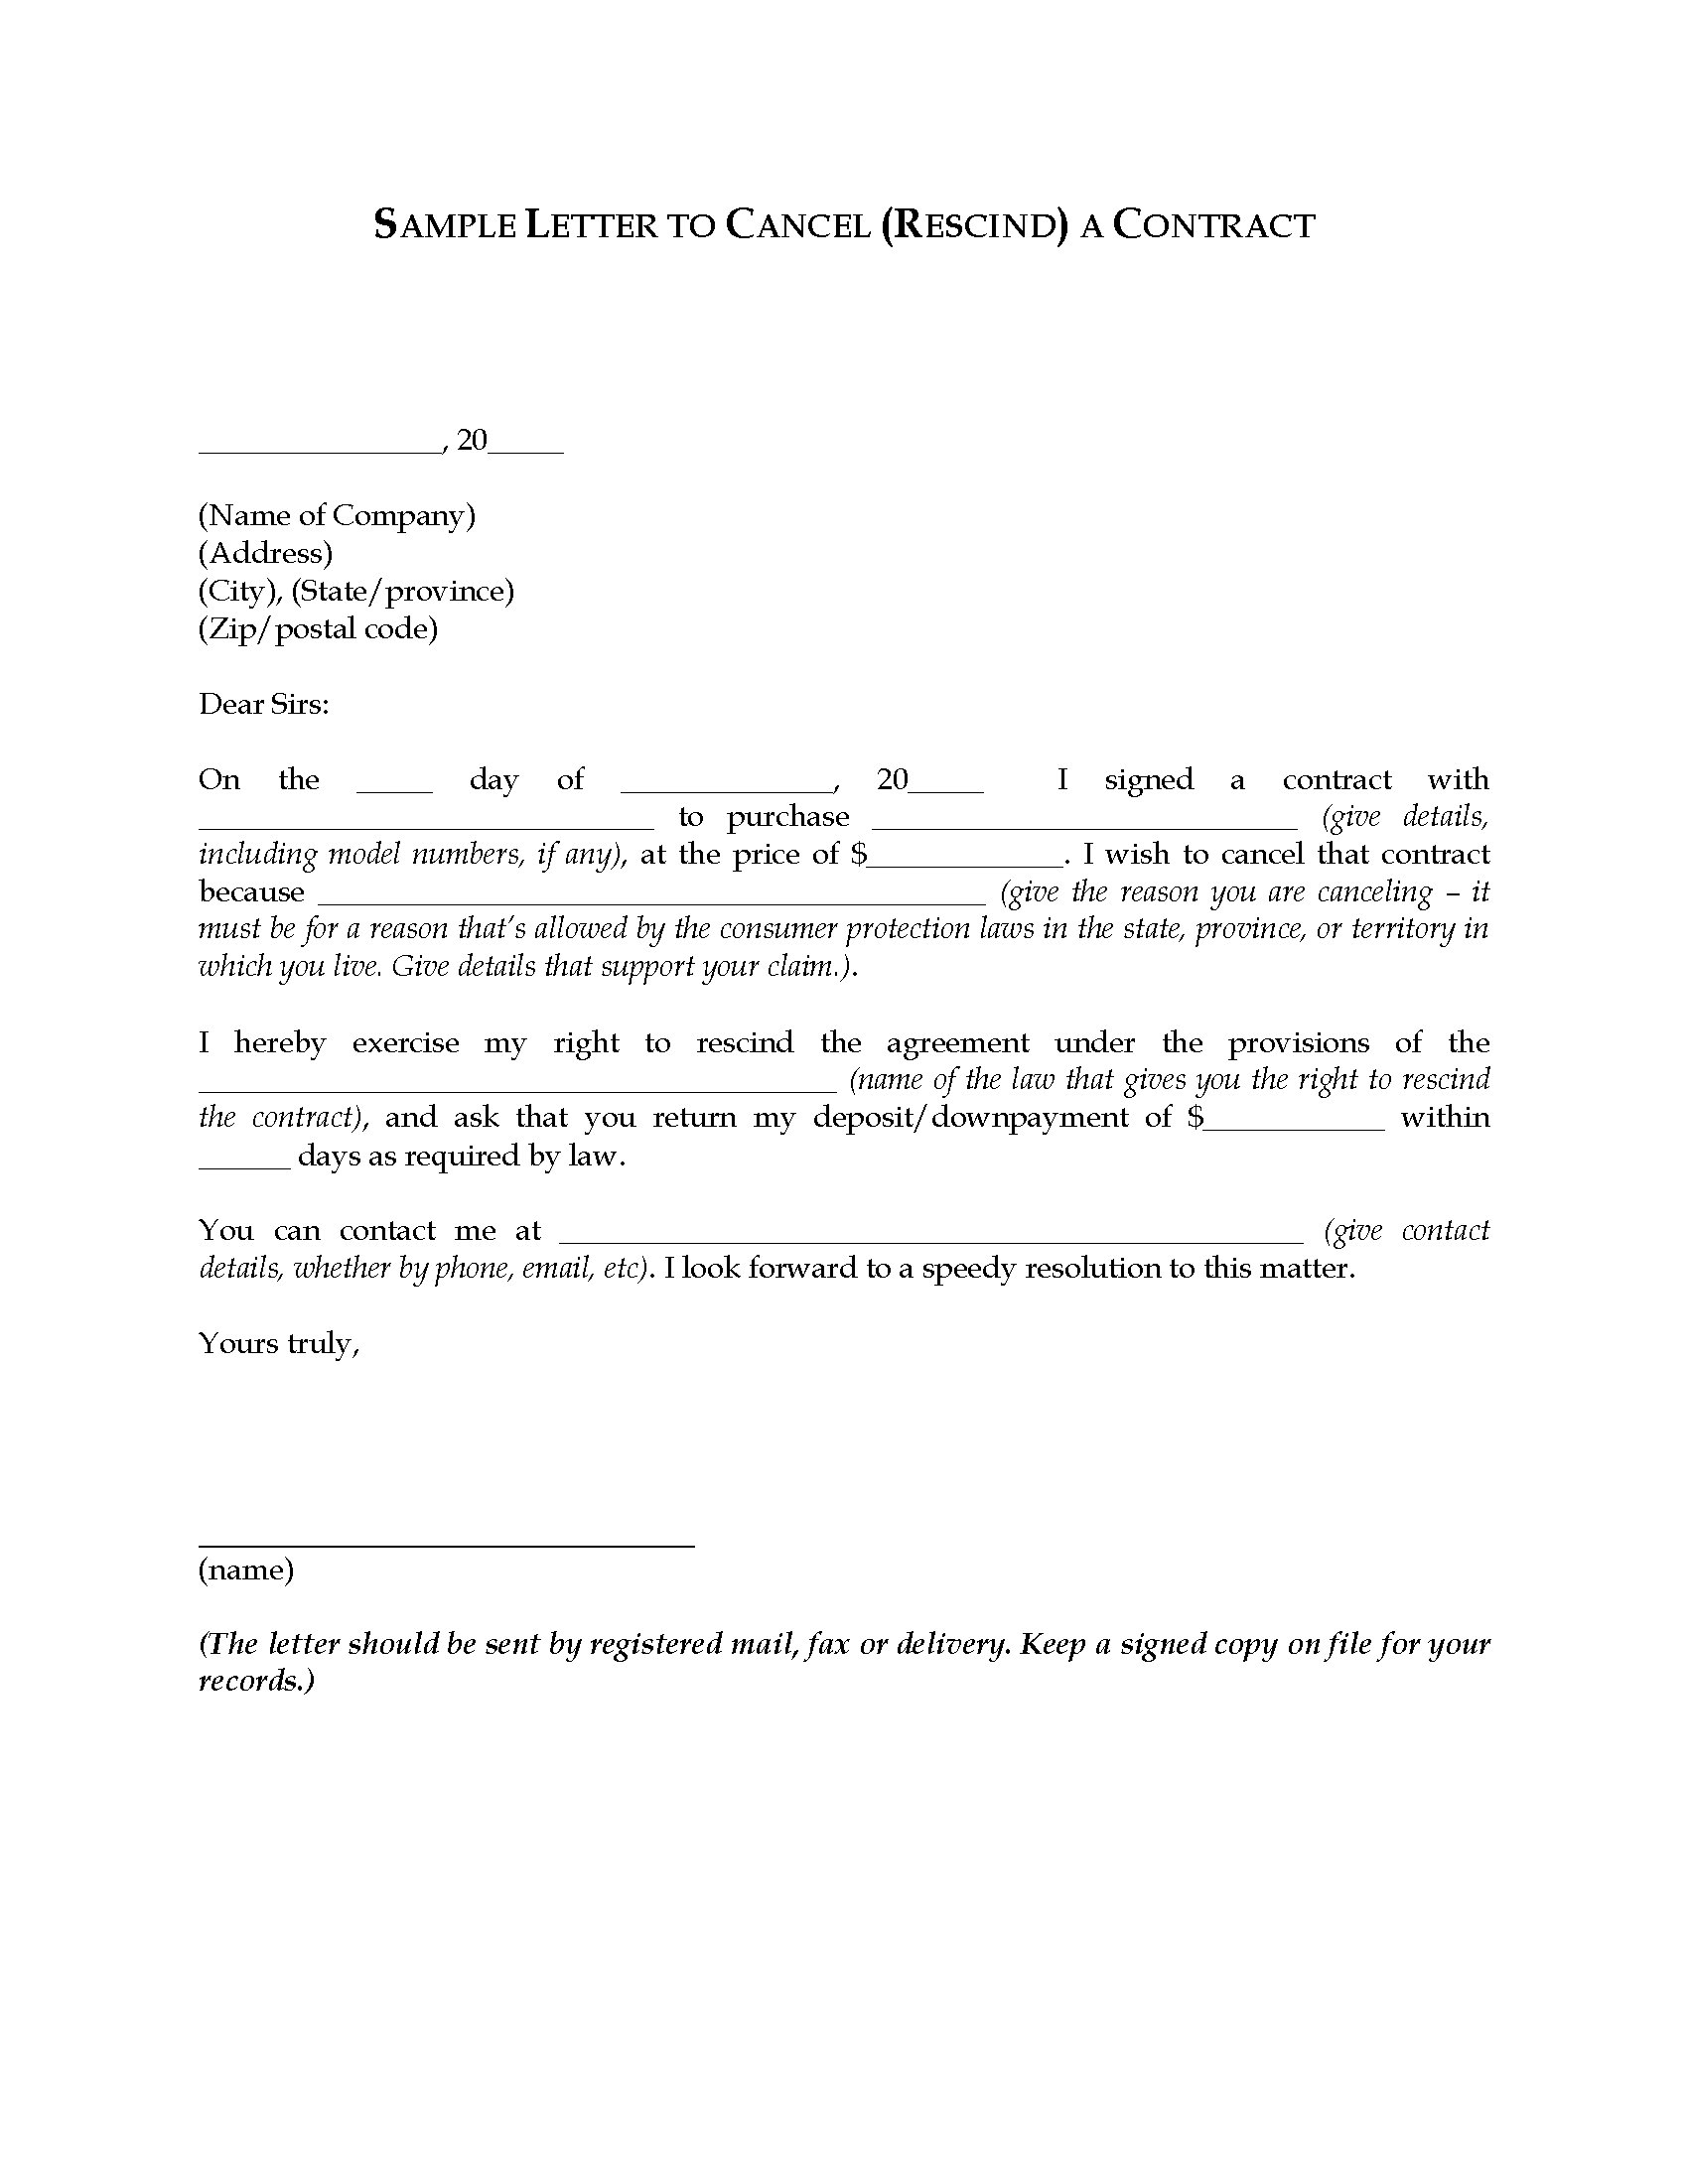 Purchase Contract Cancellation Agreement Letter To Rescind Cancel A Contract Legal Forms And Business